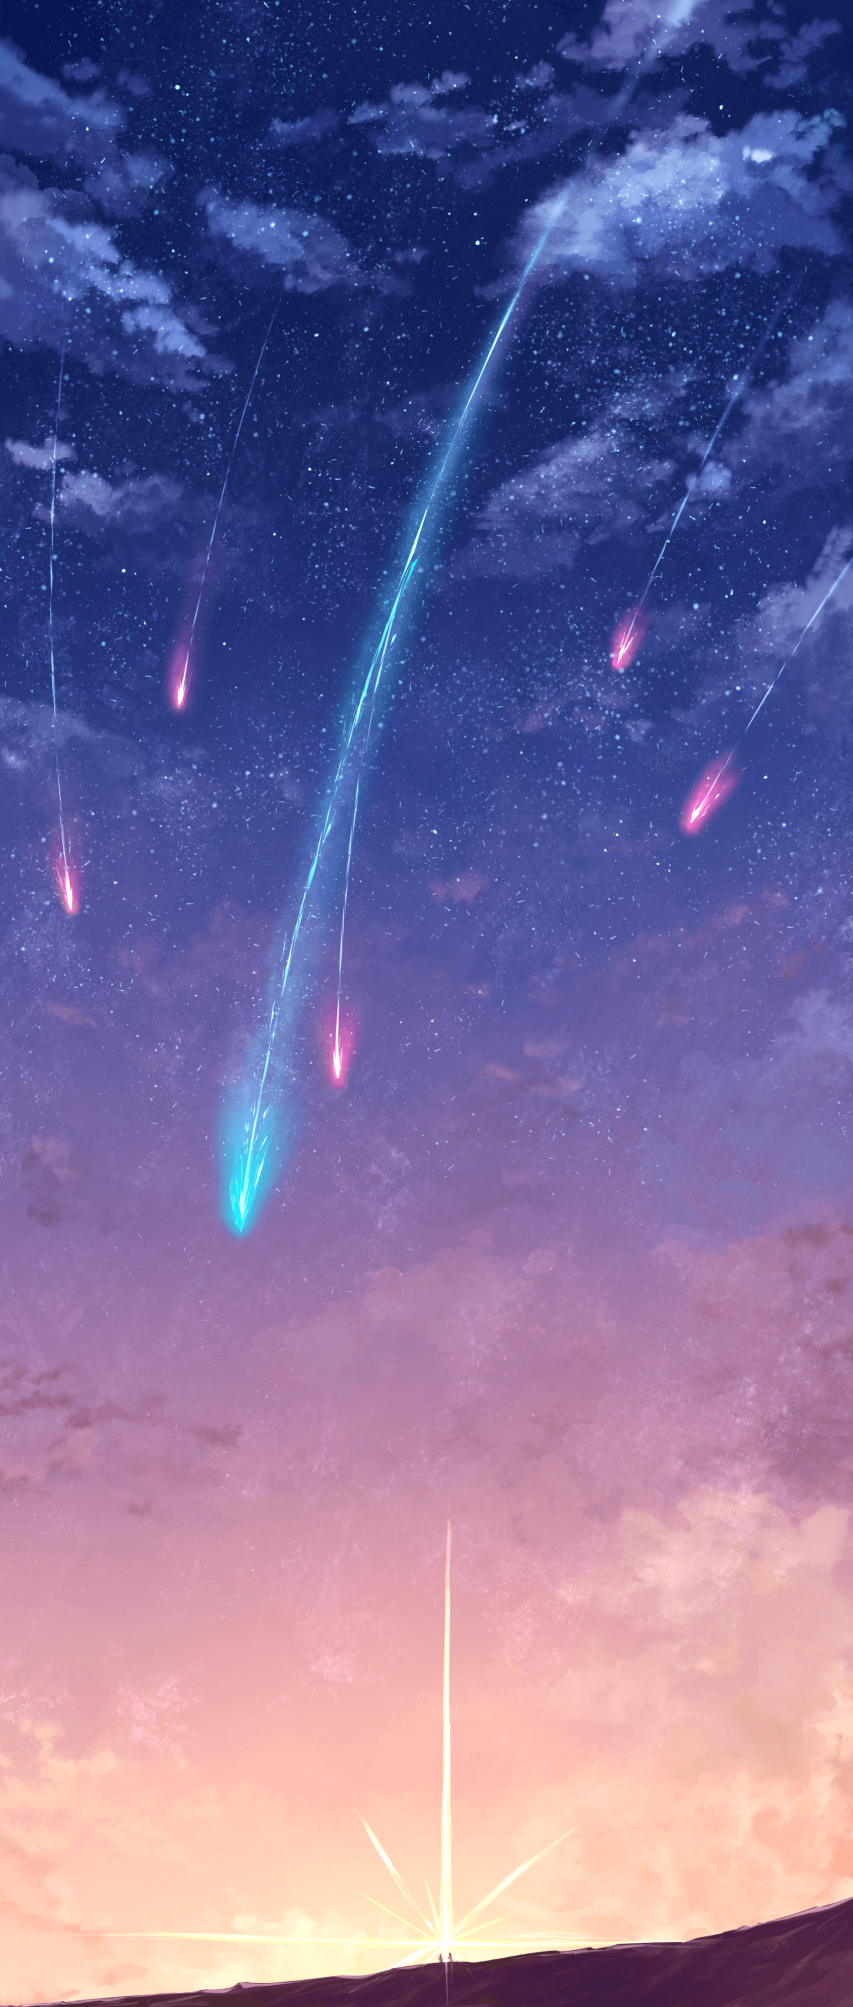 Your Name 4k hd Backgrounds for Android Phone